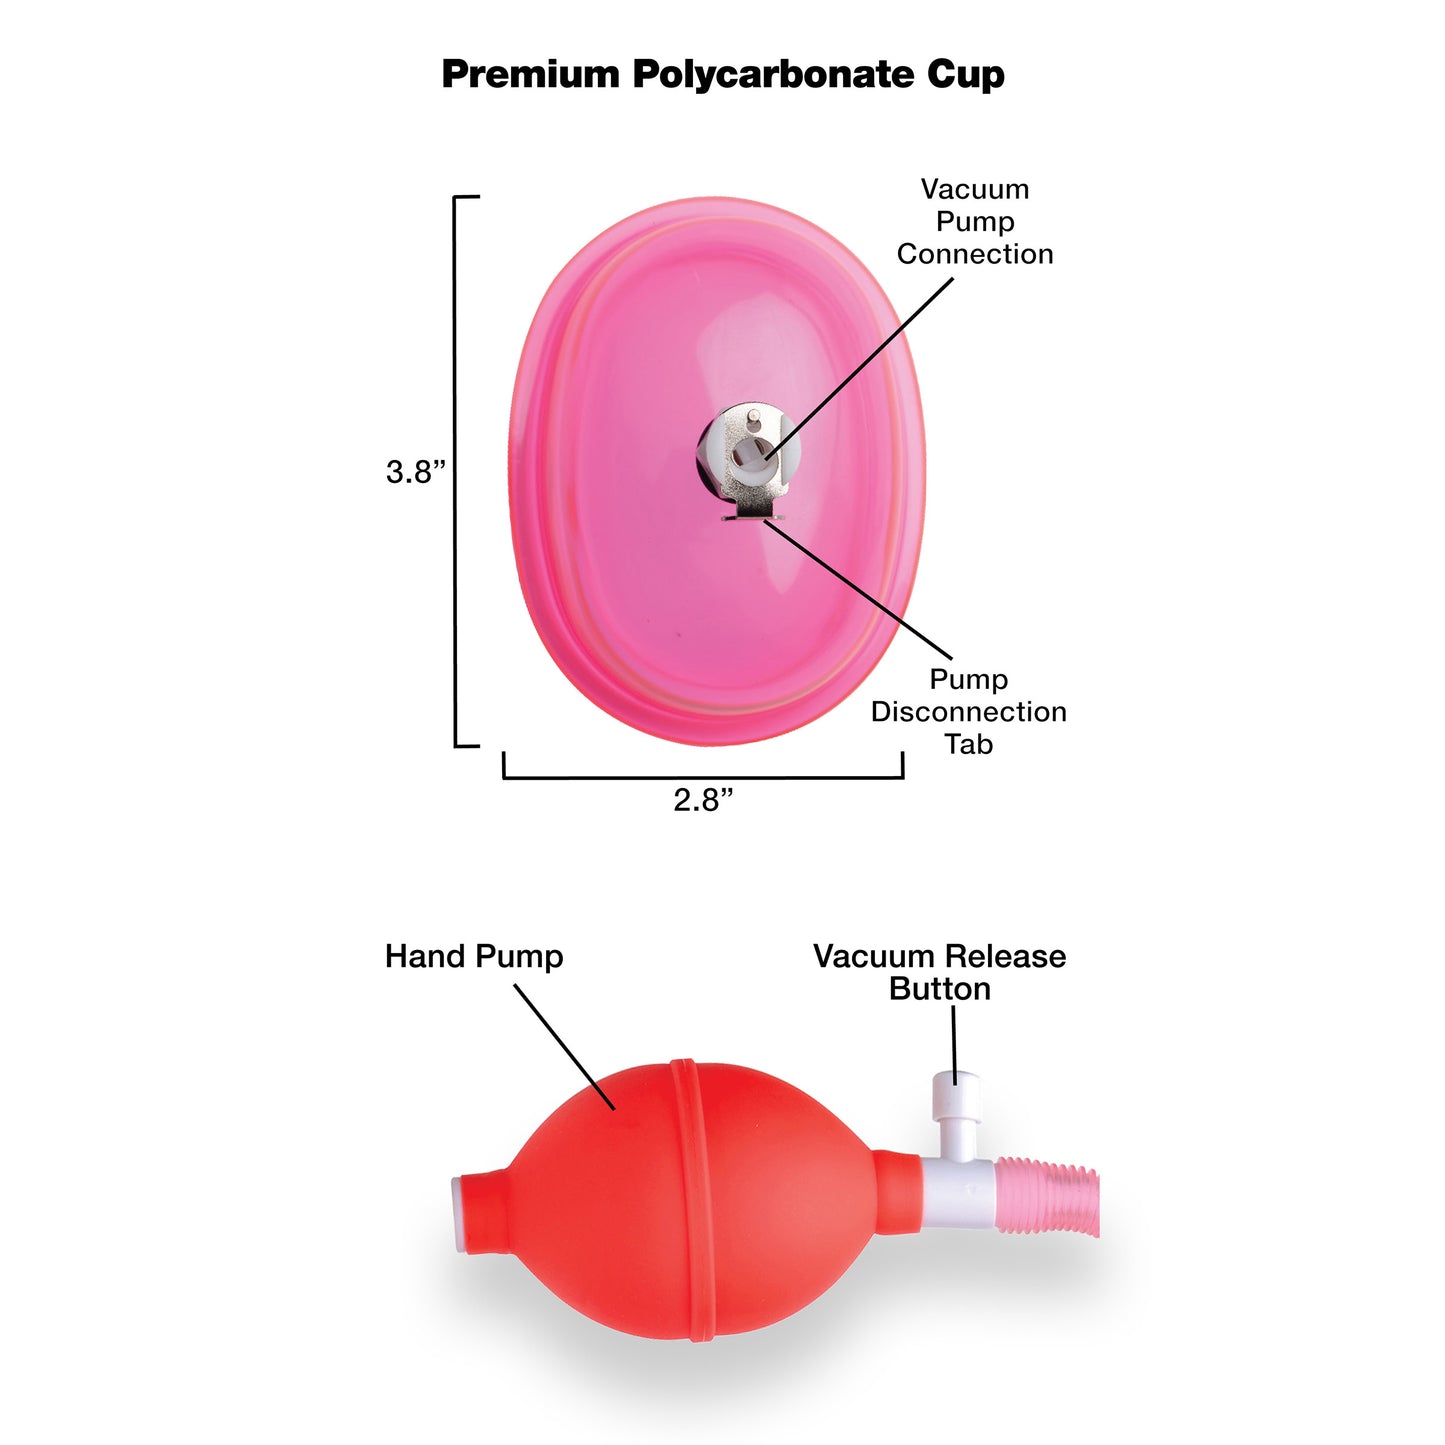 Vaginal Pump With 3.8 Inch Small Cup